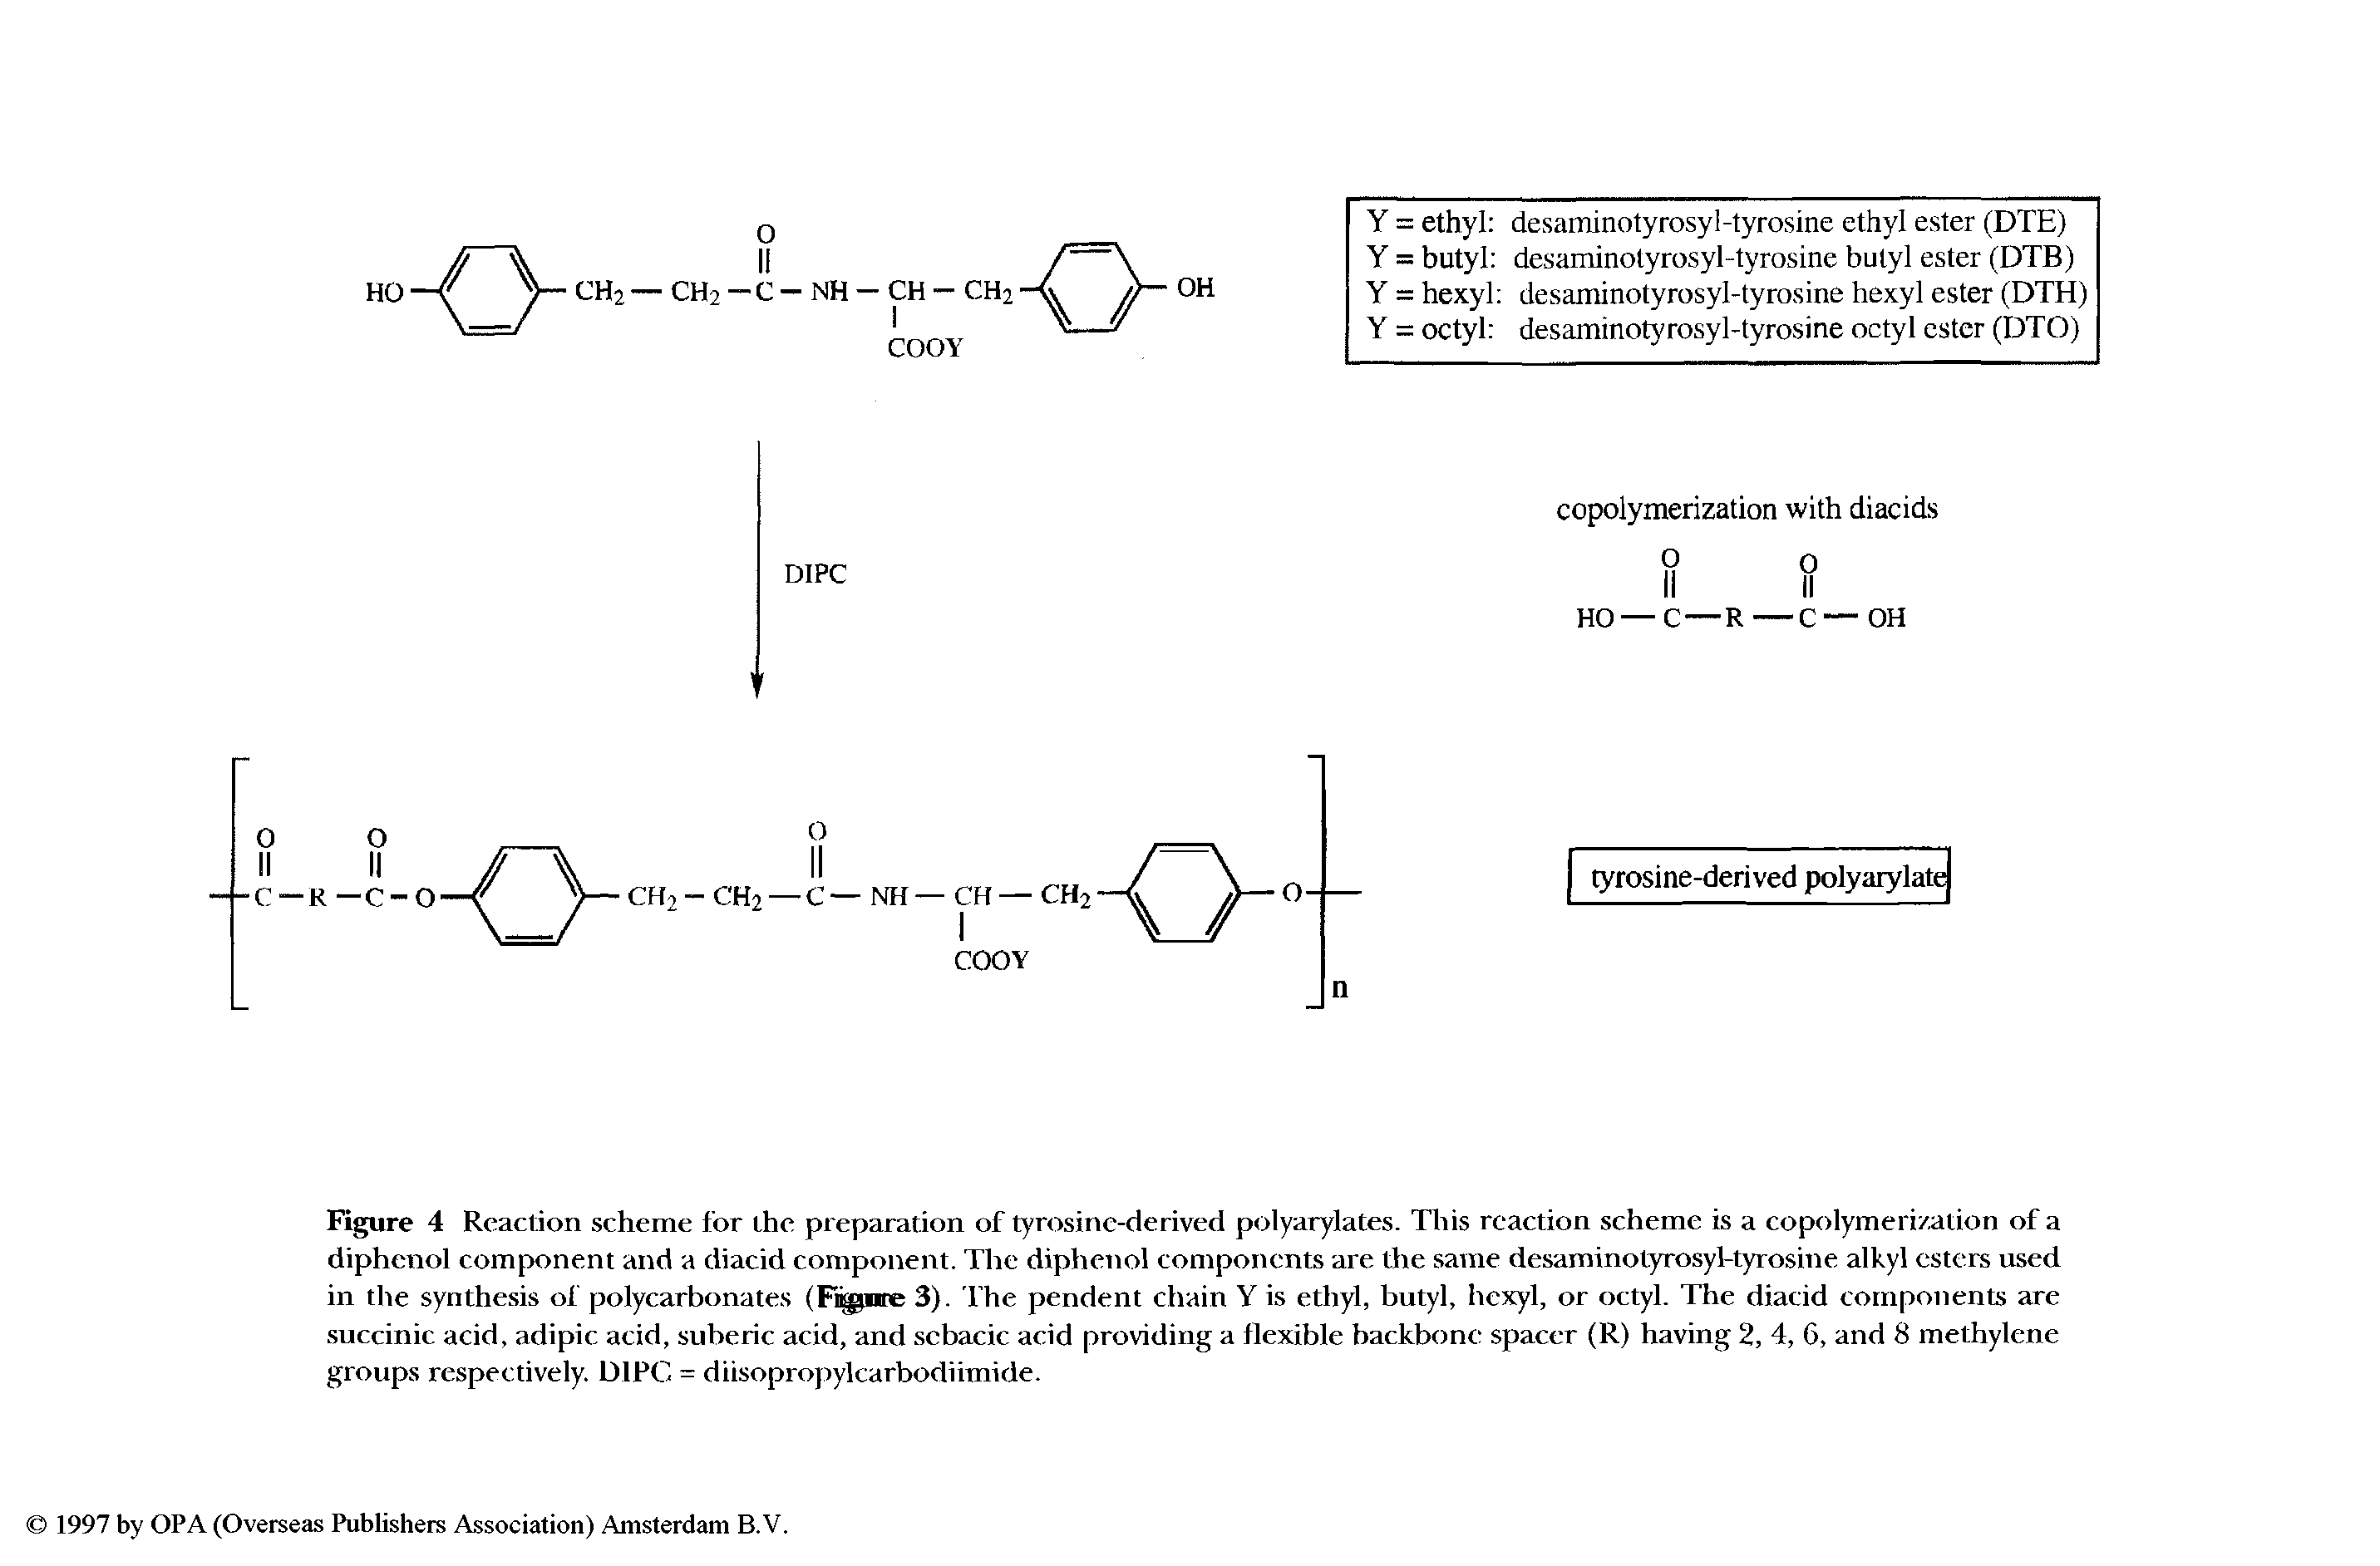 Figure 4 Reaction scheme for ihe preparation of tyrosine-derived polyarylates. This reaction scheme is a copolymerization of a diphenol component and a diacid component. The diphenol components are the same desaminotyrosyl-tyrosine alkyl esters used in the synthesis of polycarbonates (Fiipire 3). The pendent chain Y is ethyl, butyl, hexyl, or octyl. The diatid components are succinic acid, adipic acid, suberic acid, and sebacic acid providing a flexible backbone spacer (R) having 2, 4, 6, and 8 methylene groups respectively. DIPC = diisopropylcarbodiimide.